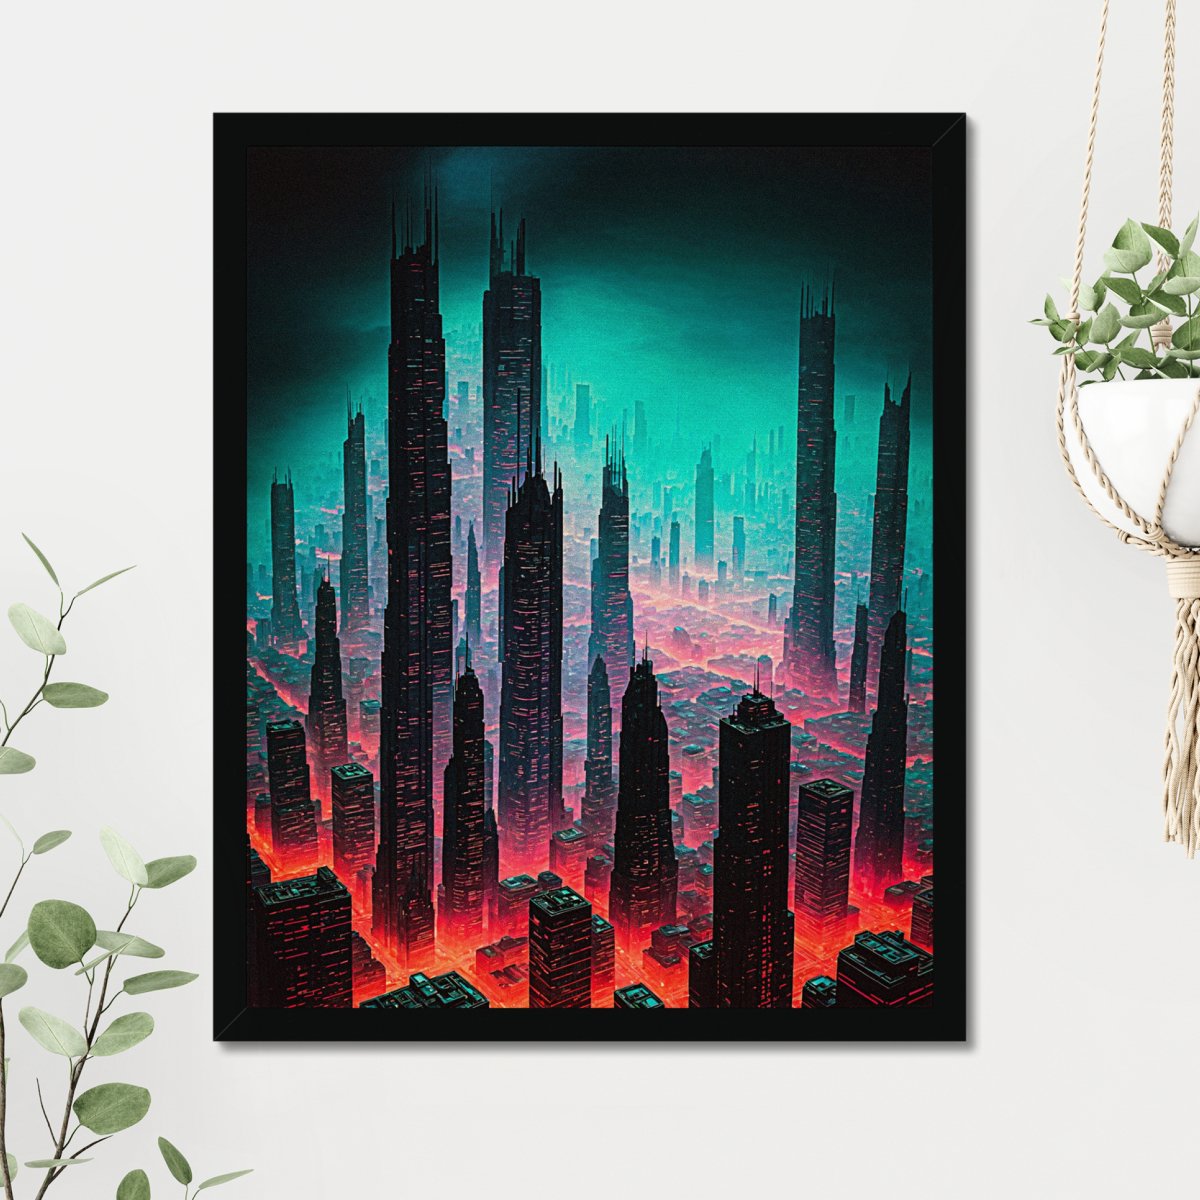 Smoggy streets - Art print - Poster - Ever colorful